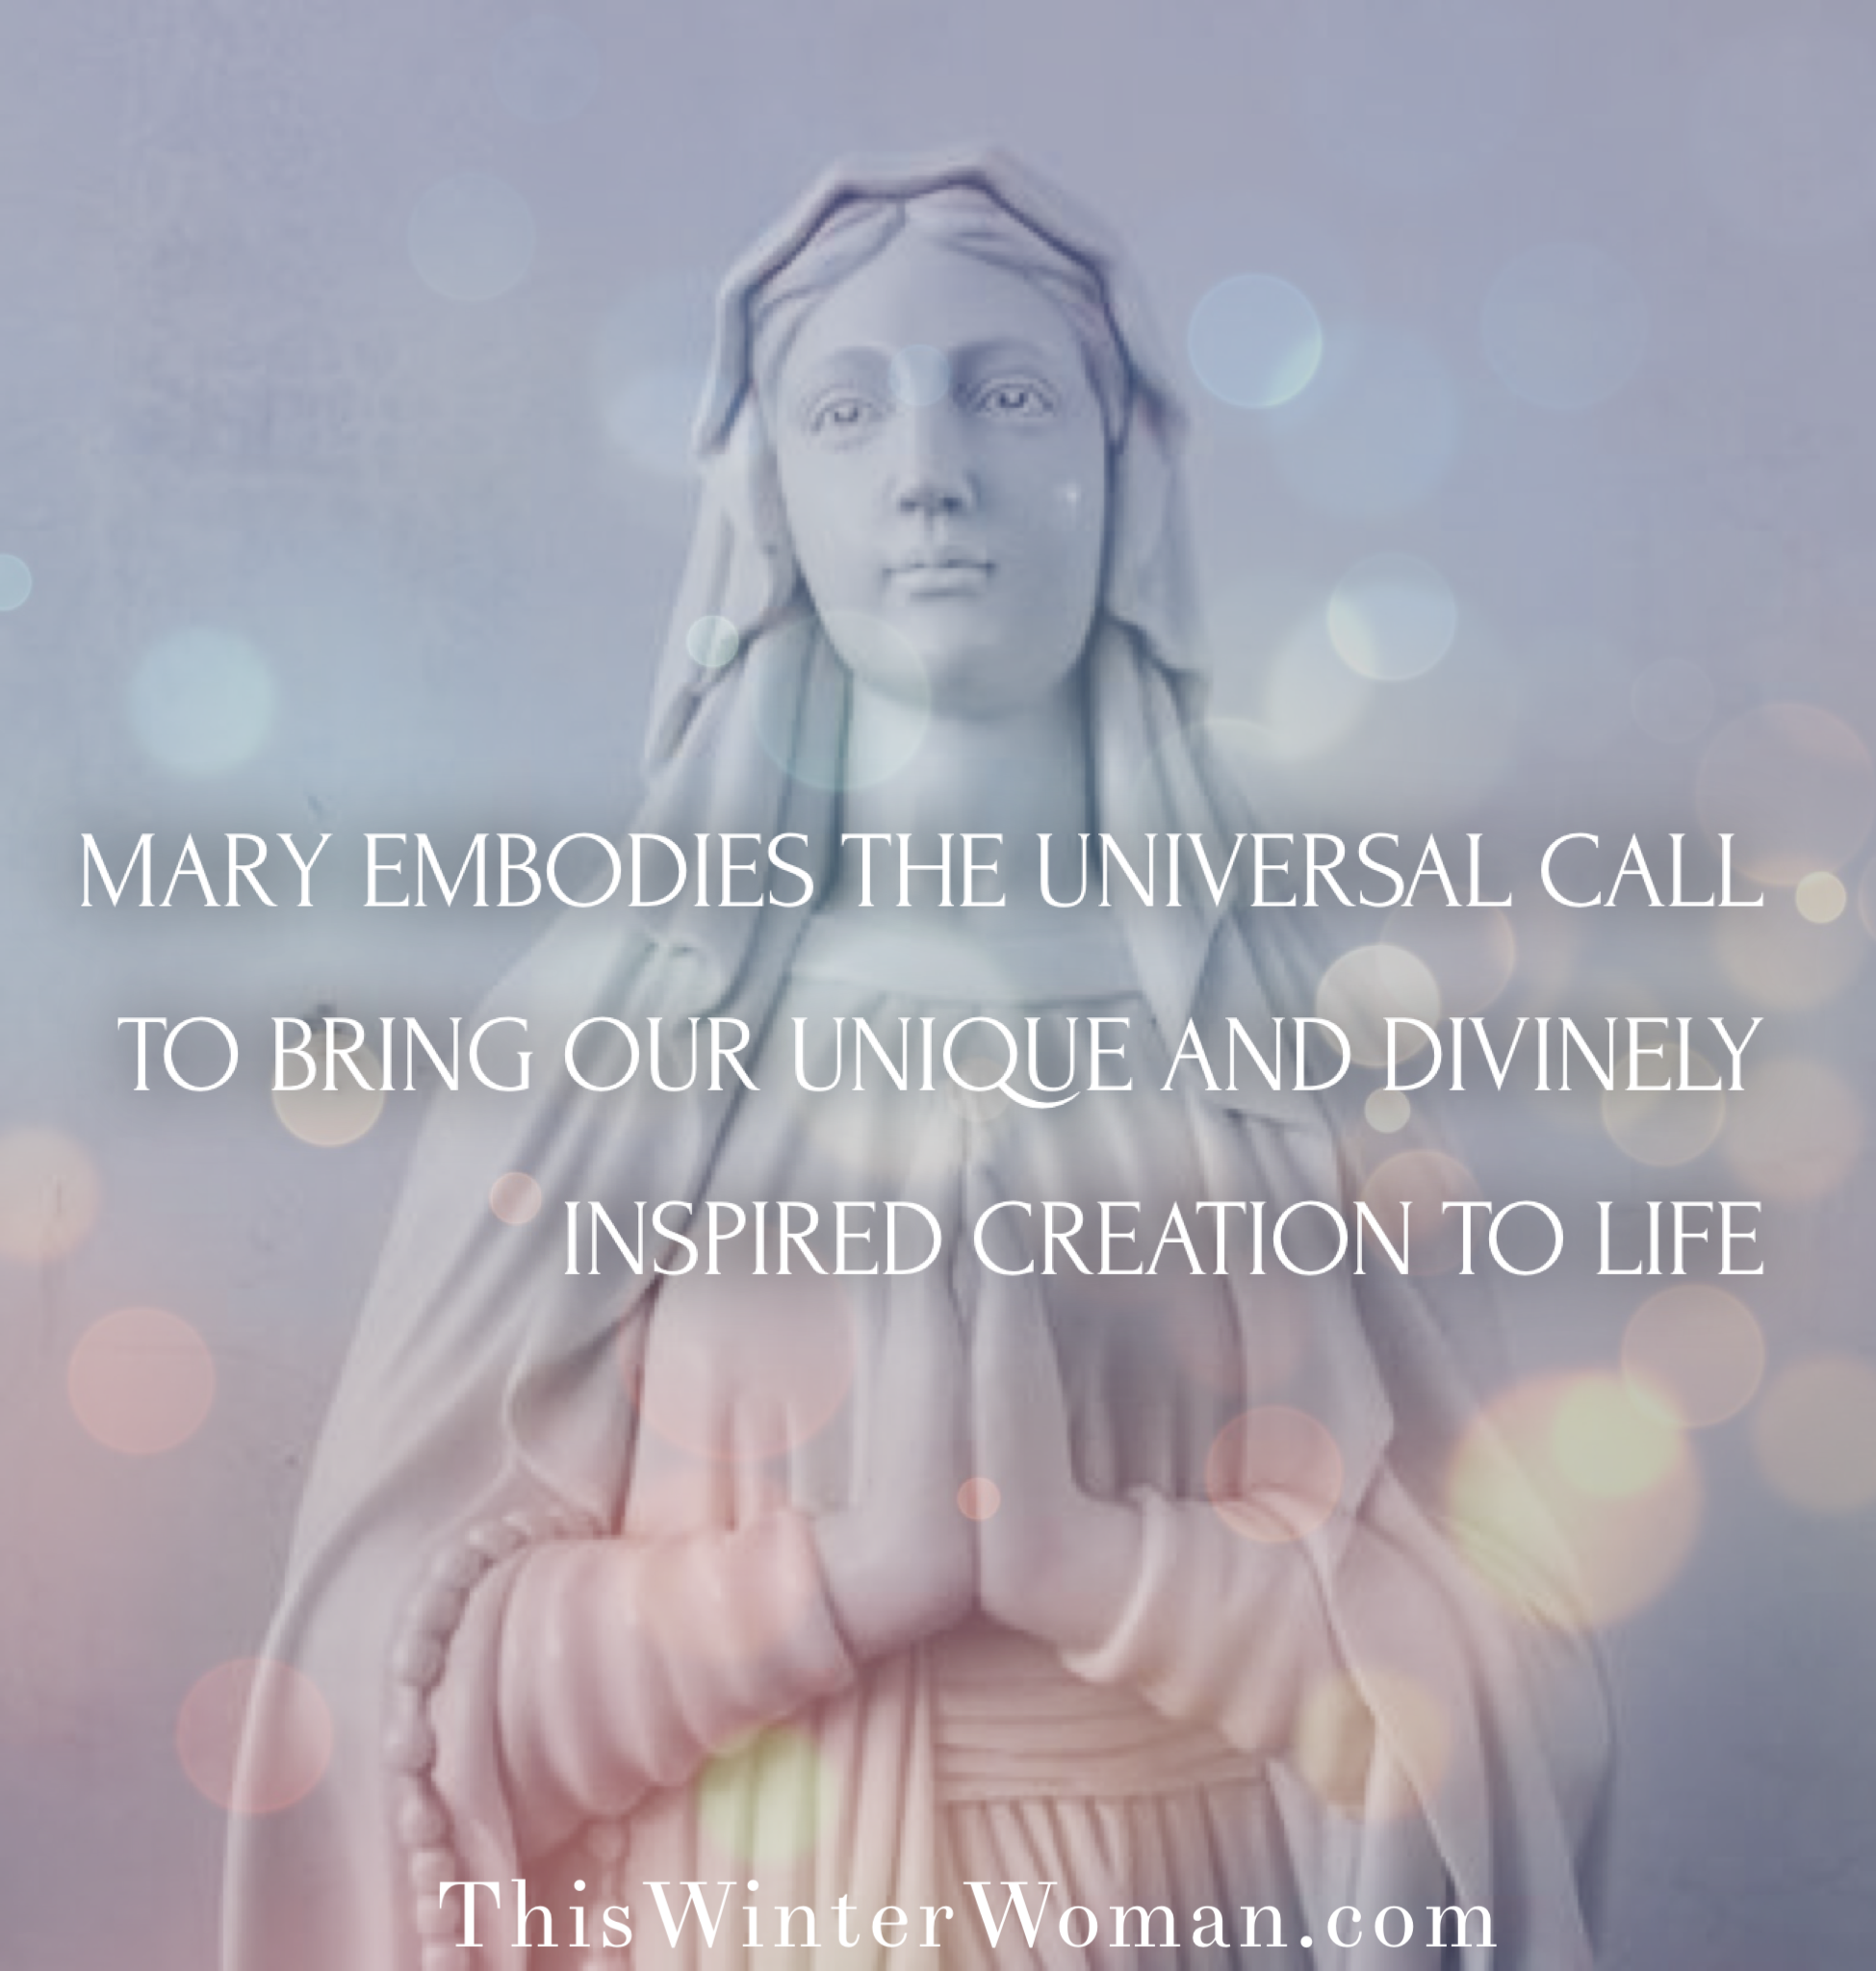 Mary Embodies the universal call to bring our unique and divinely inspired creation to life.